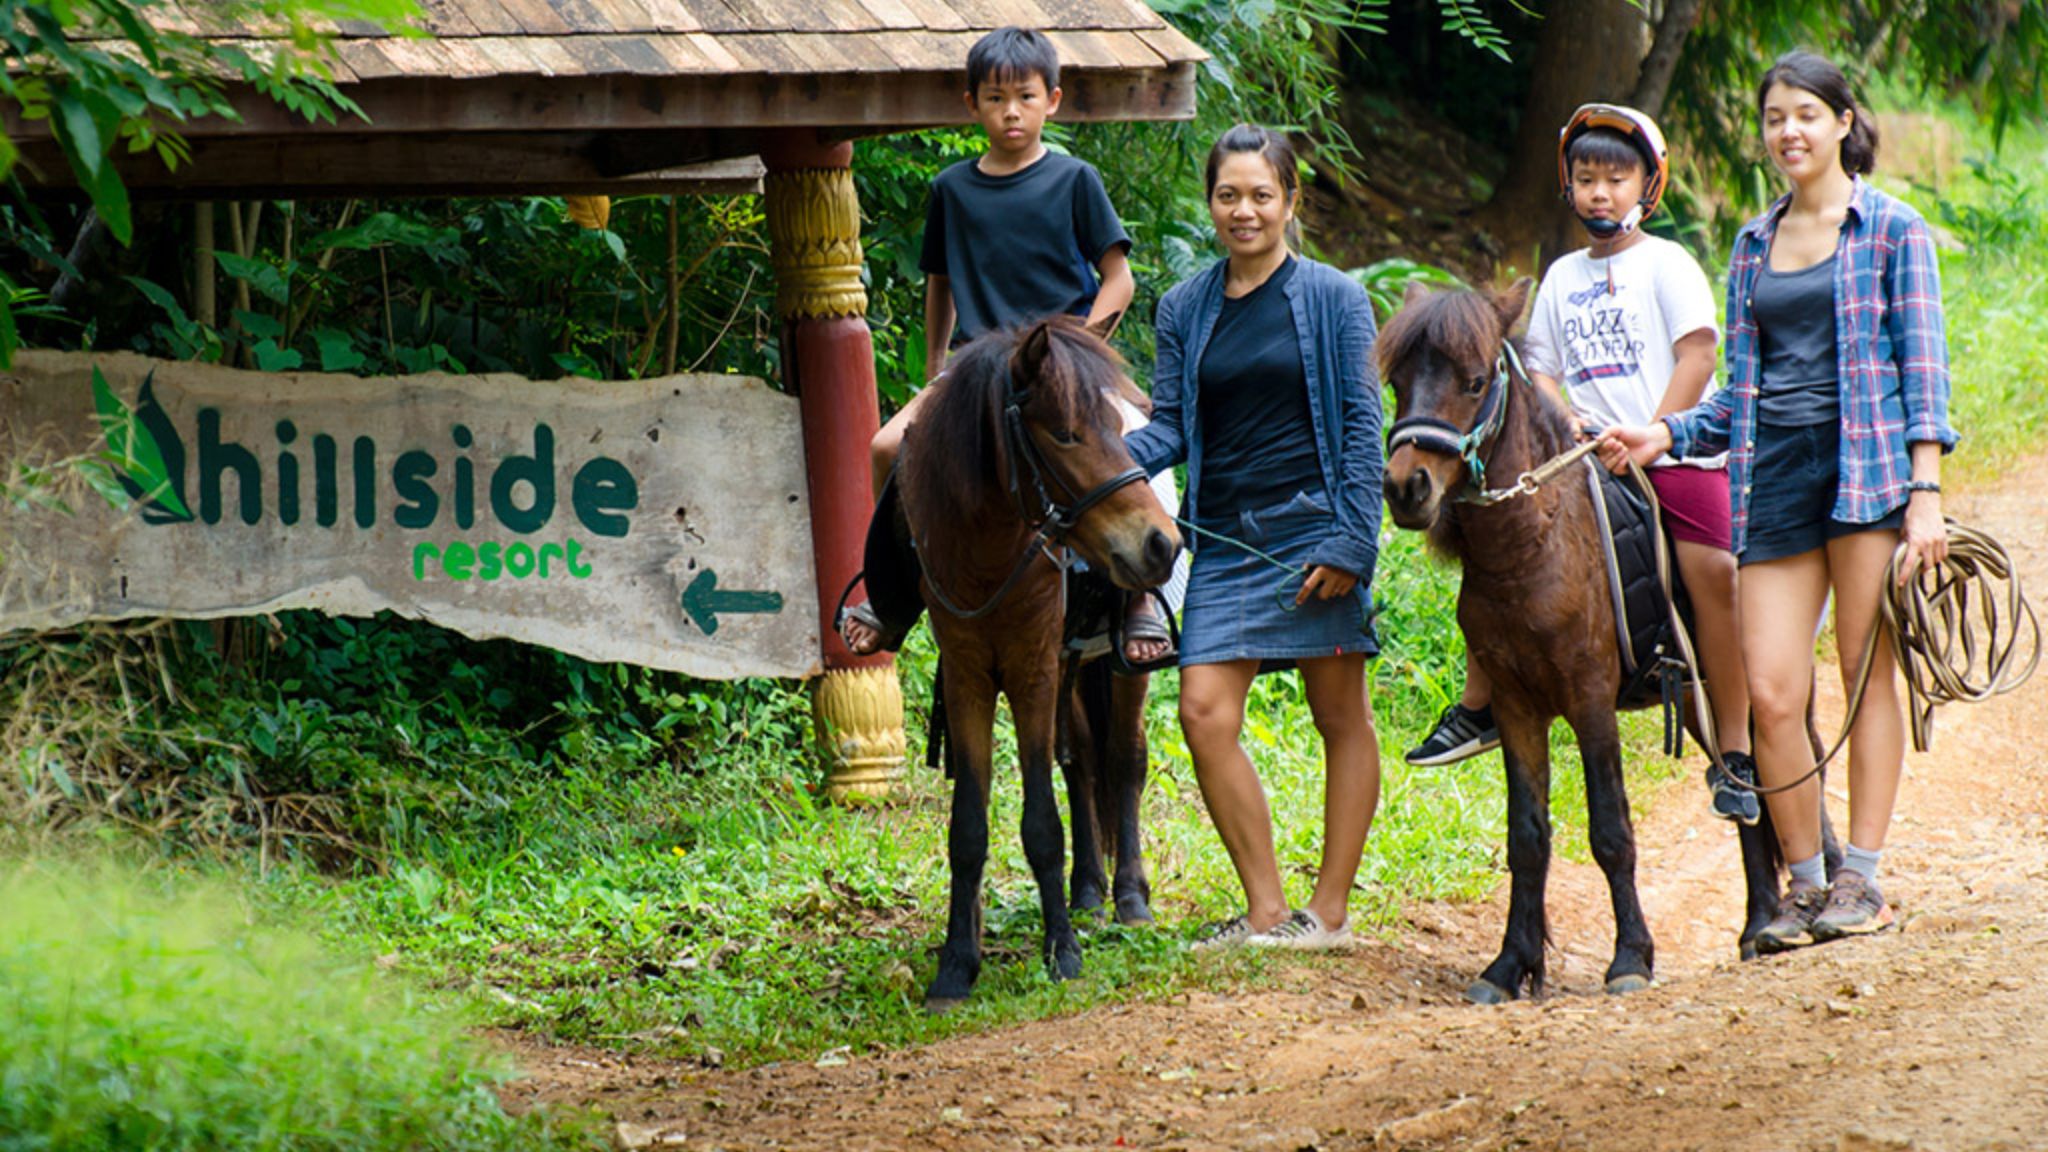 Day 5 Riding The Pony Suitable For Kids In Hillside Nature Resort